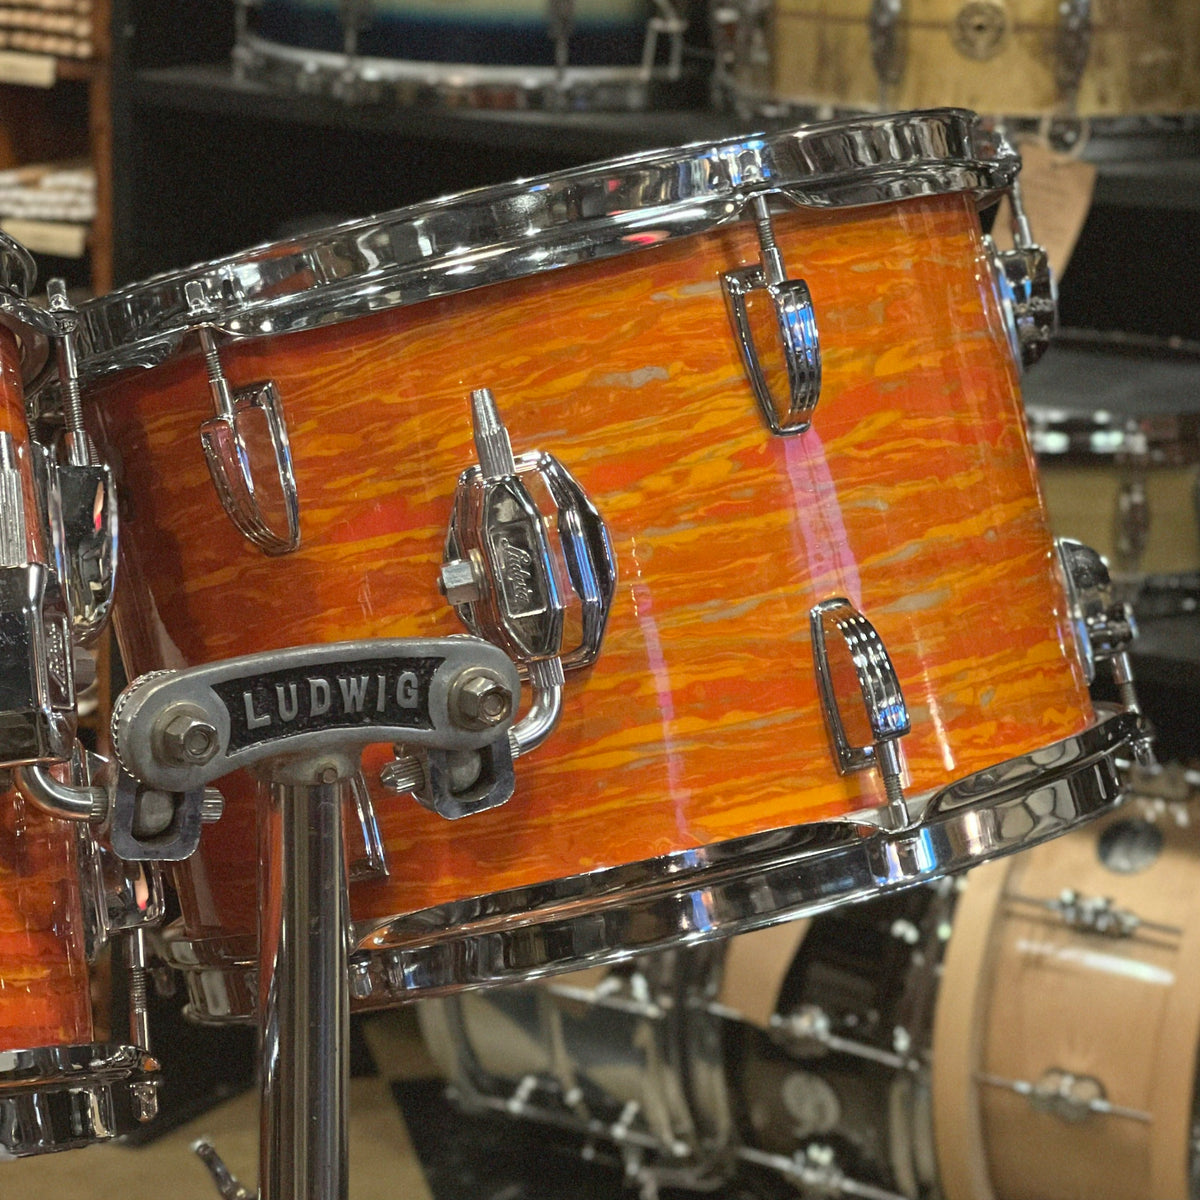 VINTAGE 1968 Ludwig Hollywood Outfit in Mod Orange - 14x22, 8x12